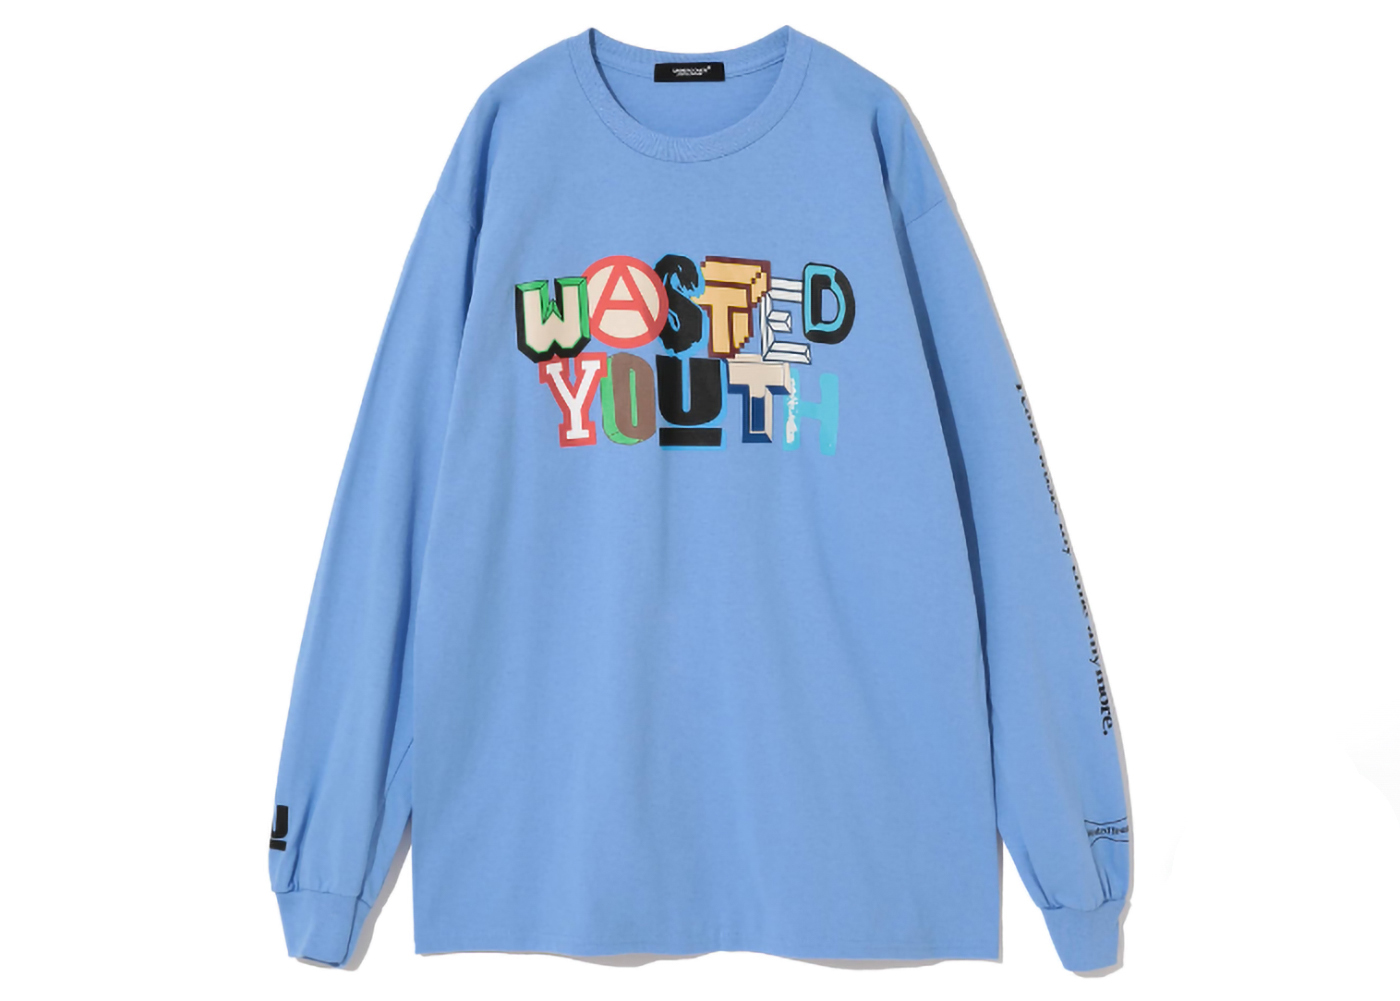 Undercover x Verdy Wasted Youth L/S T-Shirt Light Blue - SS23 - US